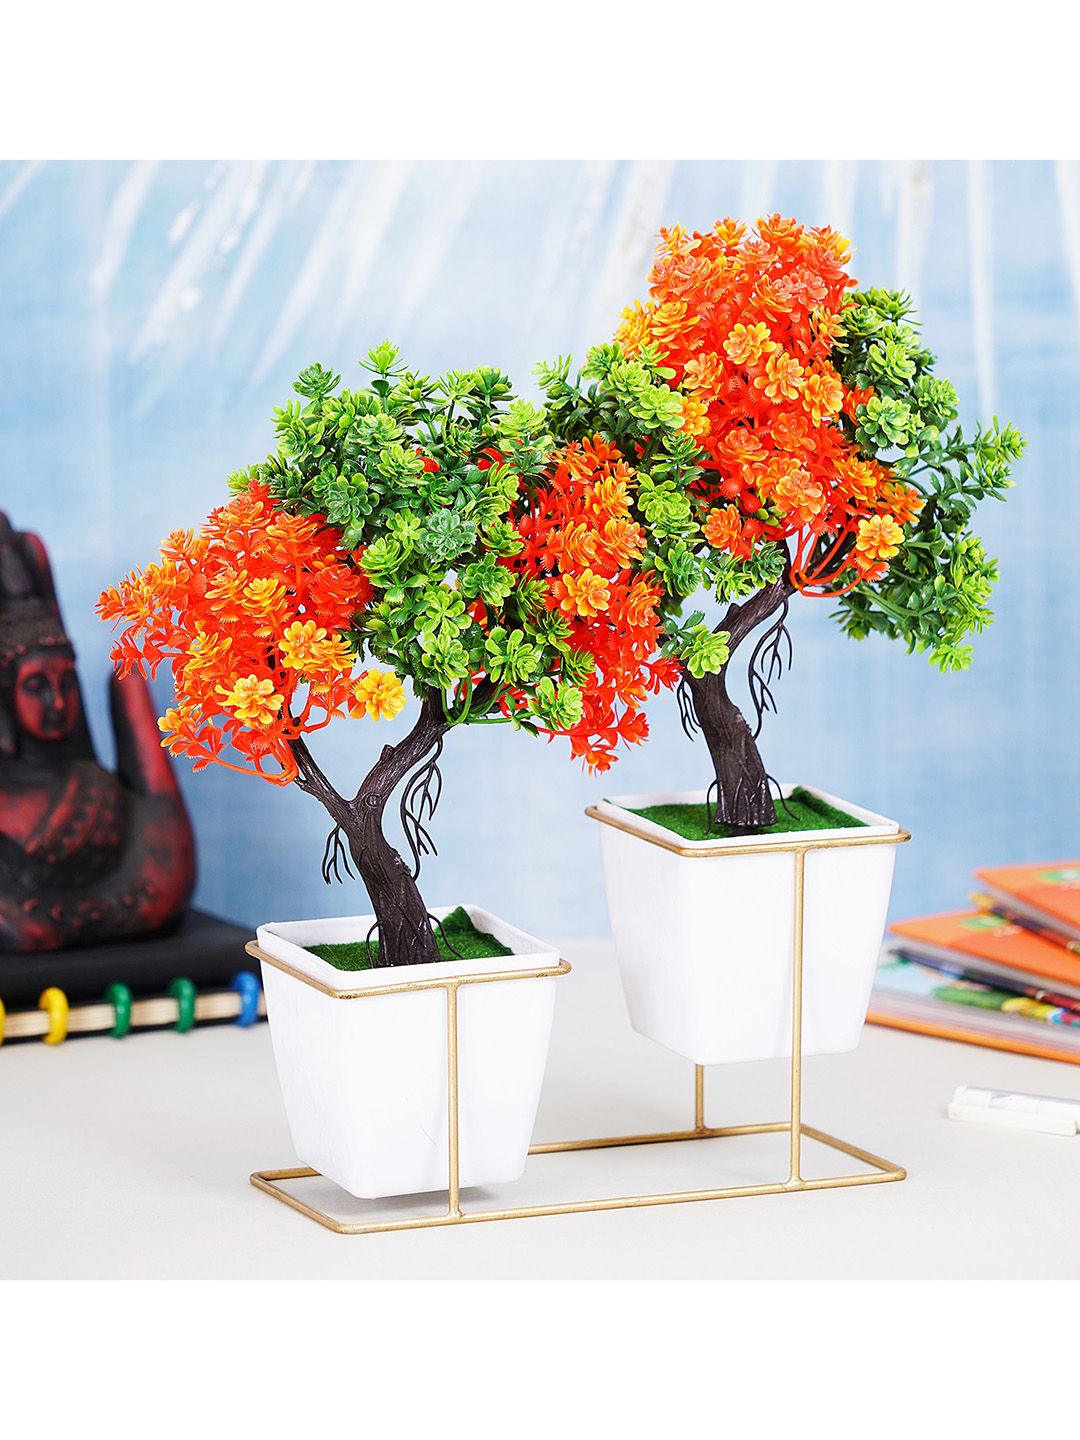 Dekorly Set of 2 Artificial Wild Bonsai Plants With Pot and Metal Stand for Home Decor and Gifting Price in India